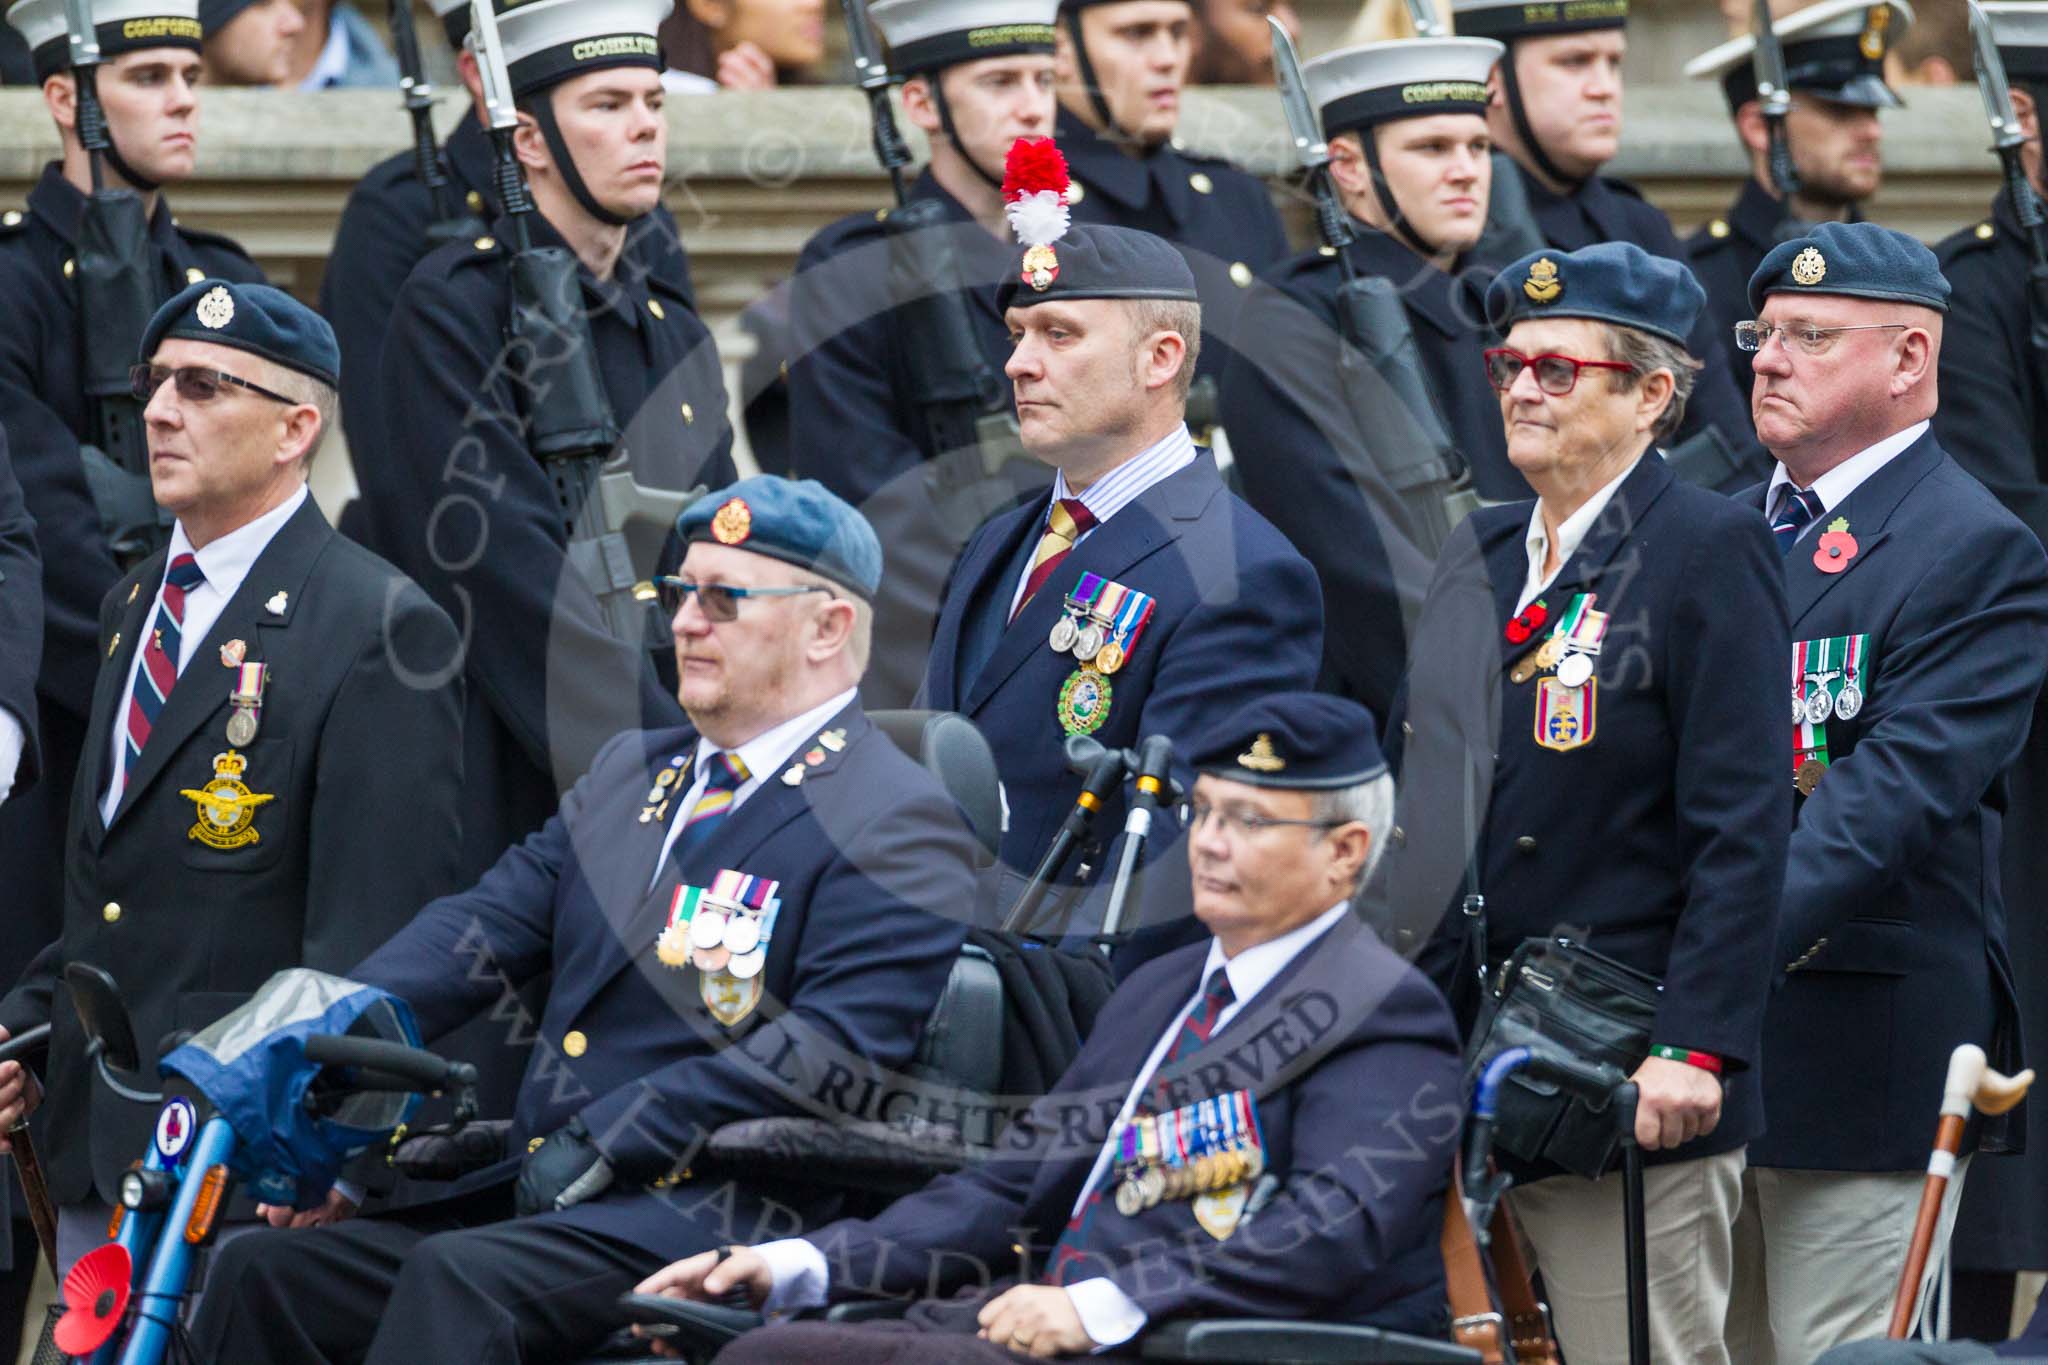 Remembrance Sunday at the Cenotaph 2015: Group F16, National Gulf Veterans & Families Association.
Cenotaph, Whitehall, London SW1,
London,
Greater London,
United Kingdom,
on 08 November 2015 at 12:06, image #1082